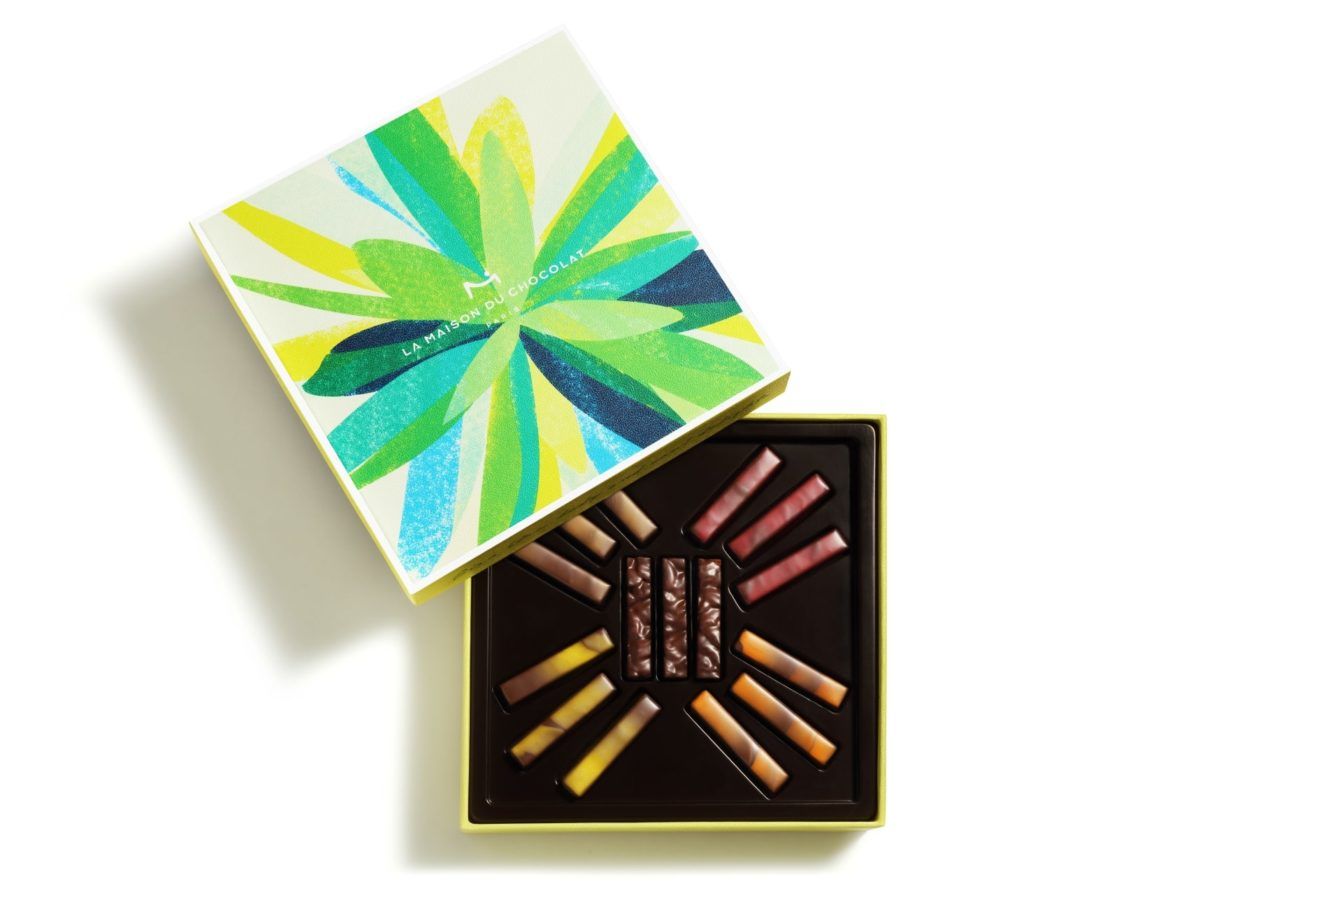 French Chocolatiers are Shaking Up the Confectionery World with Healthier Options